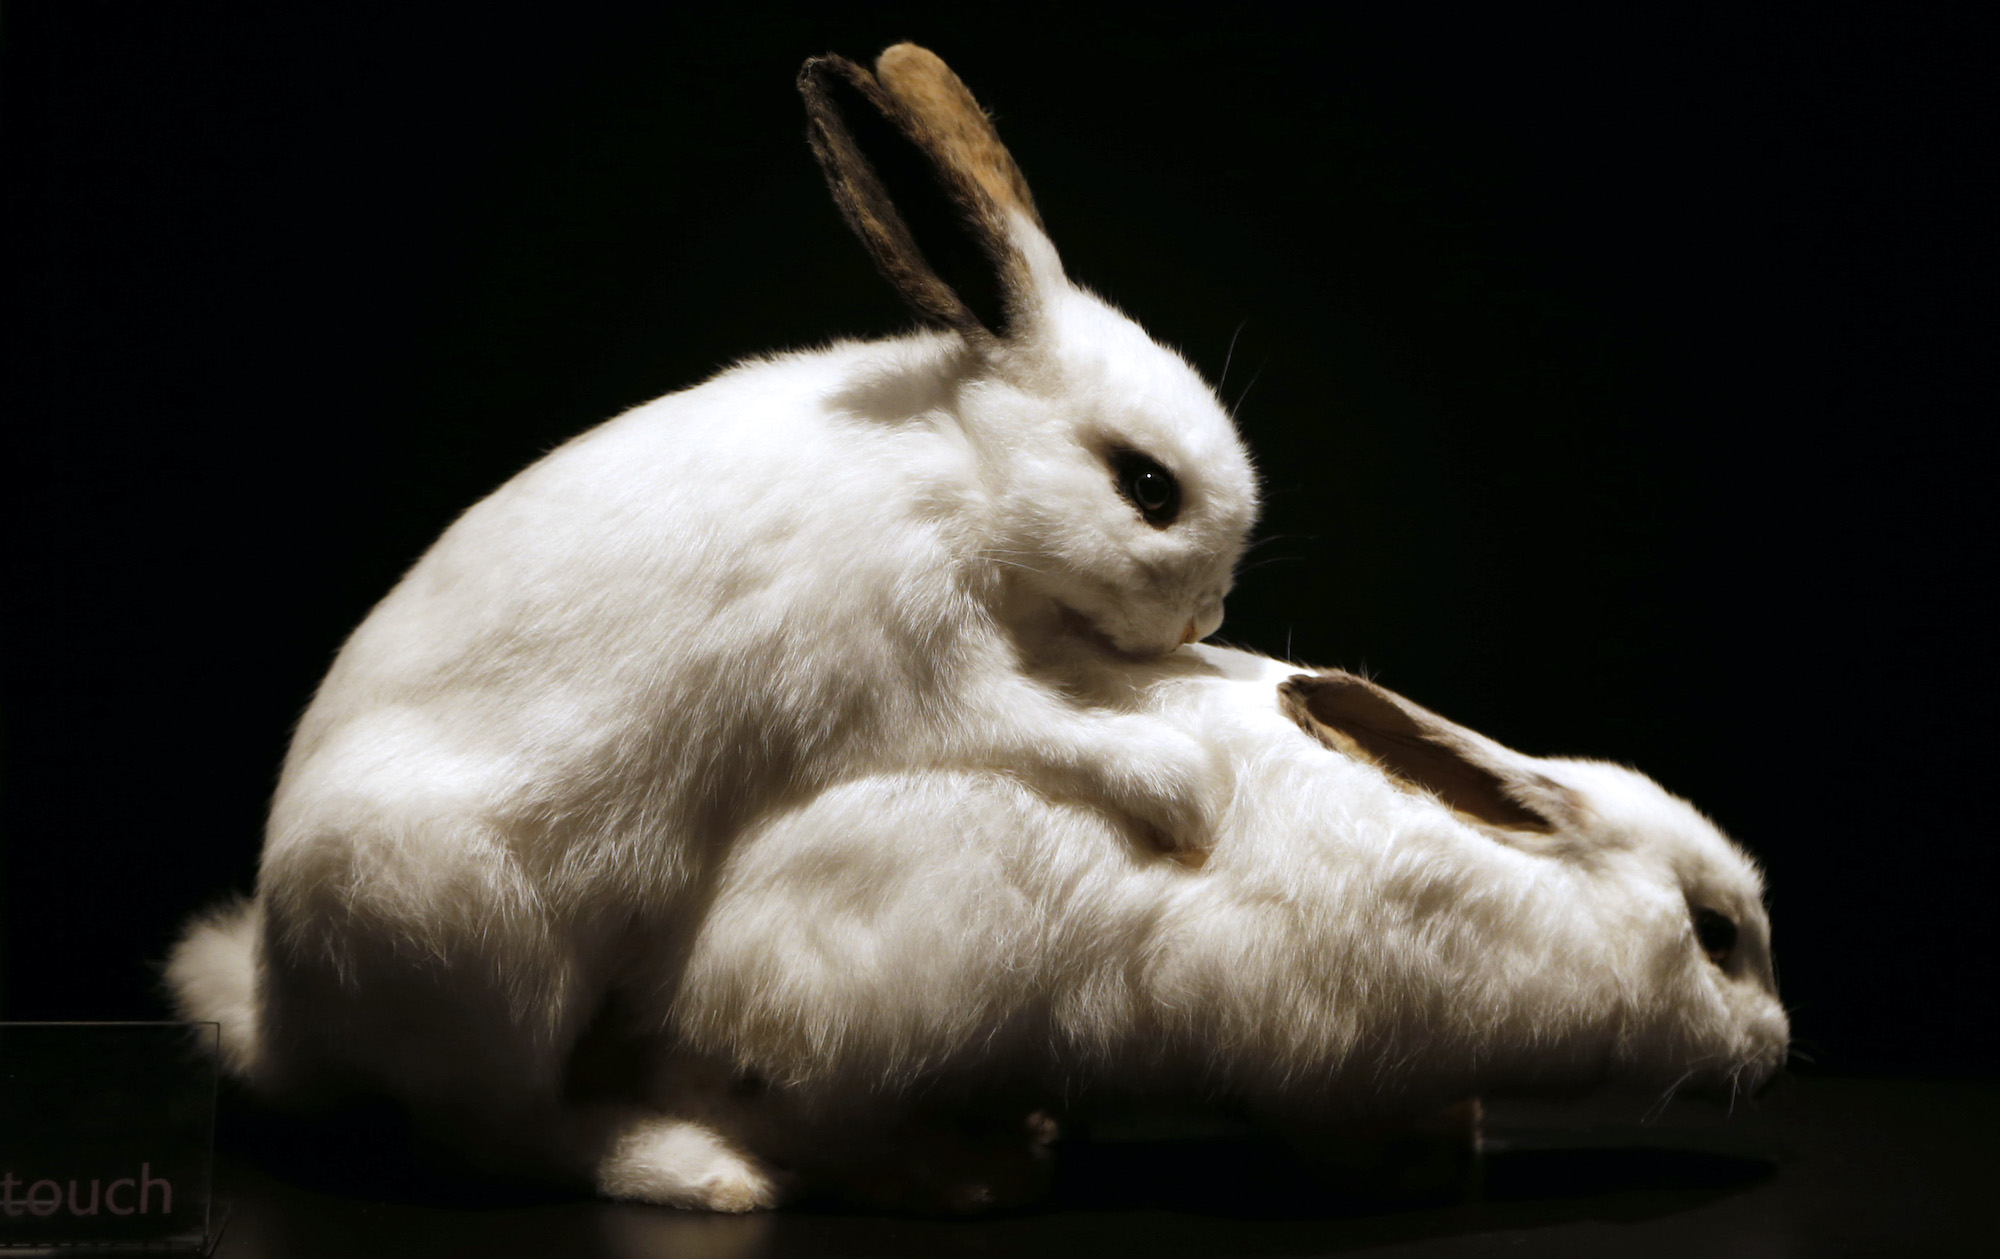 Stuffed rabbits copulating are on display at the Palais de la Decouverte (scientific museum) in Paris on October 23, 2012 as part of an exhibition.